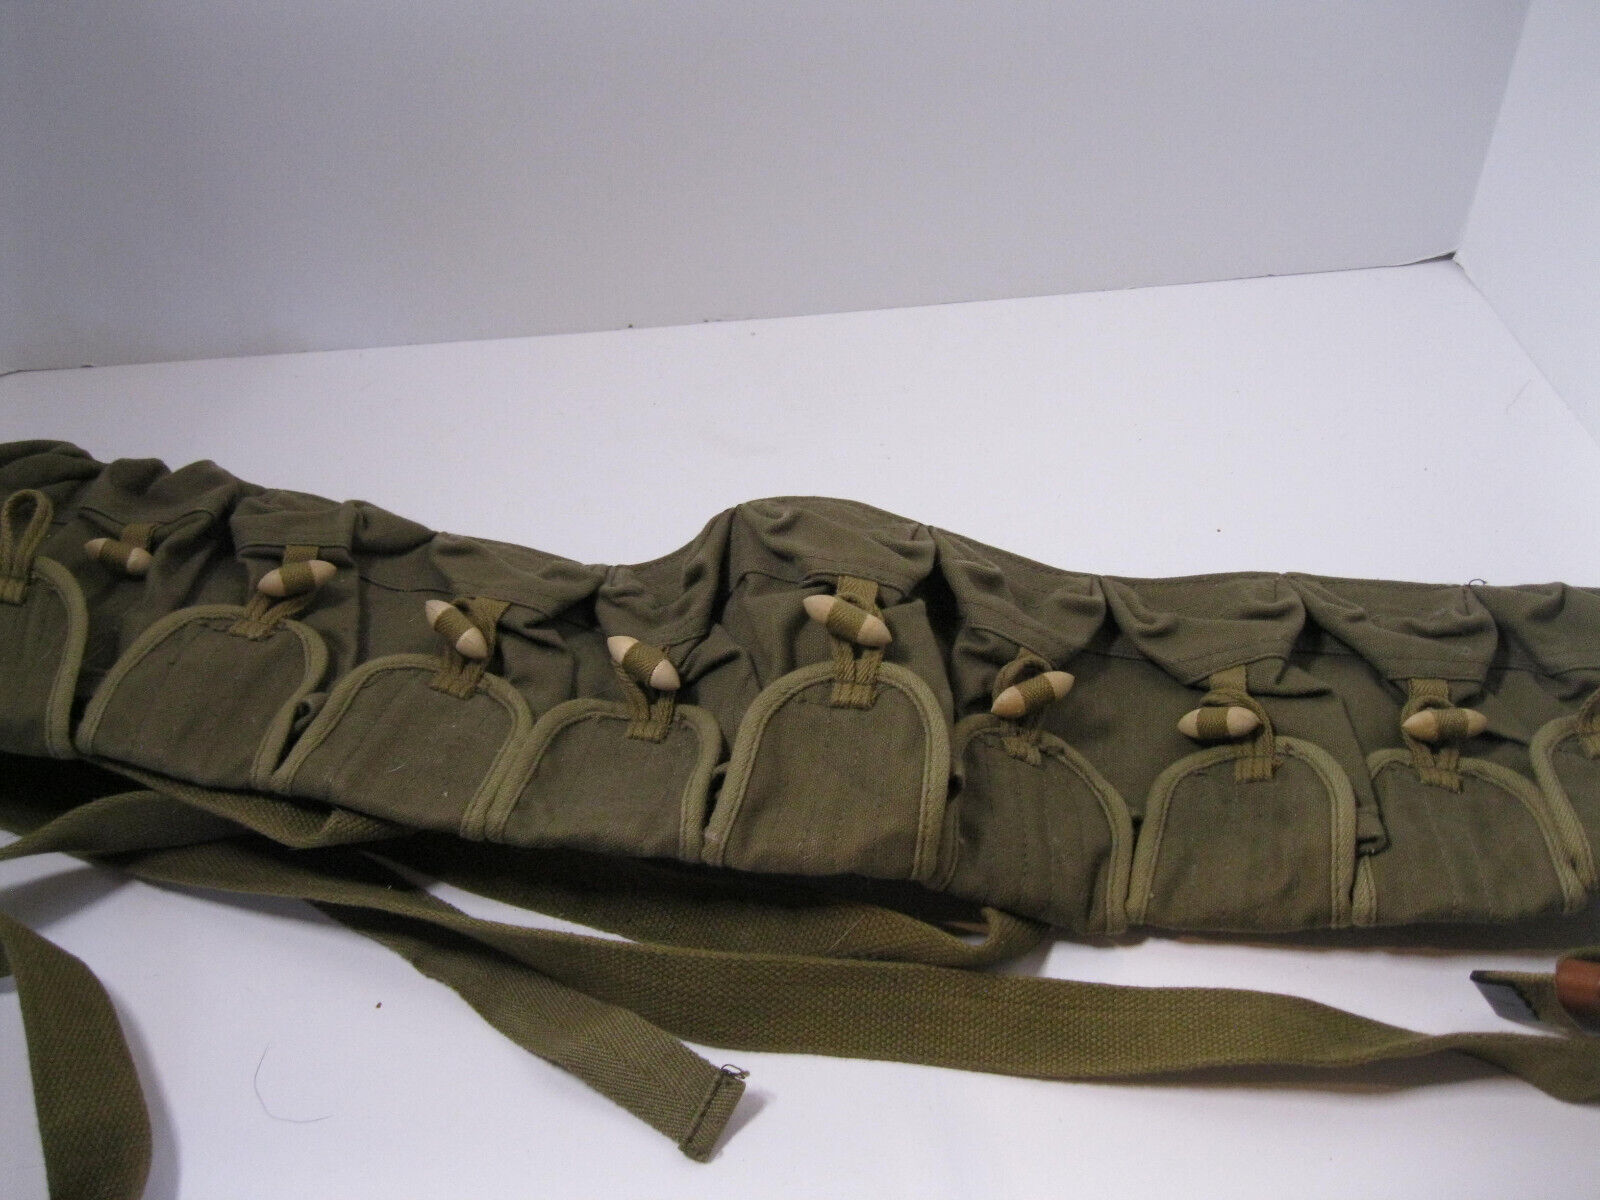 Chinese Army Ammo Belt 7.62x39 Canvas Olive Green - Vintage